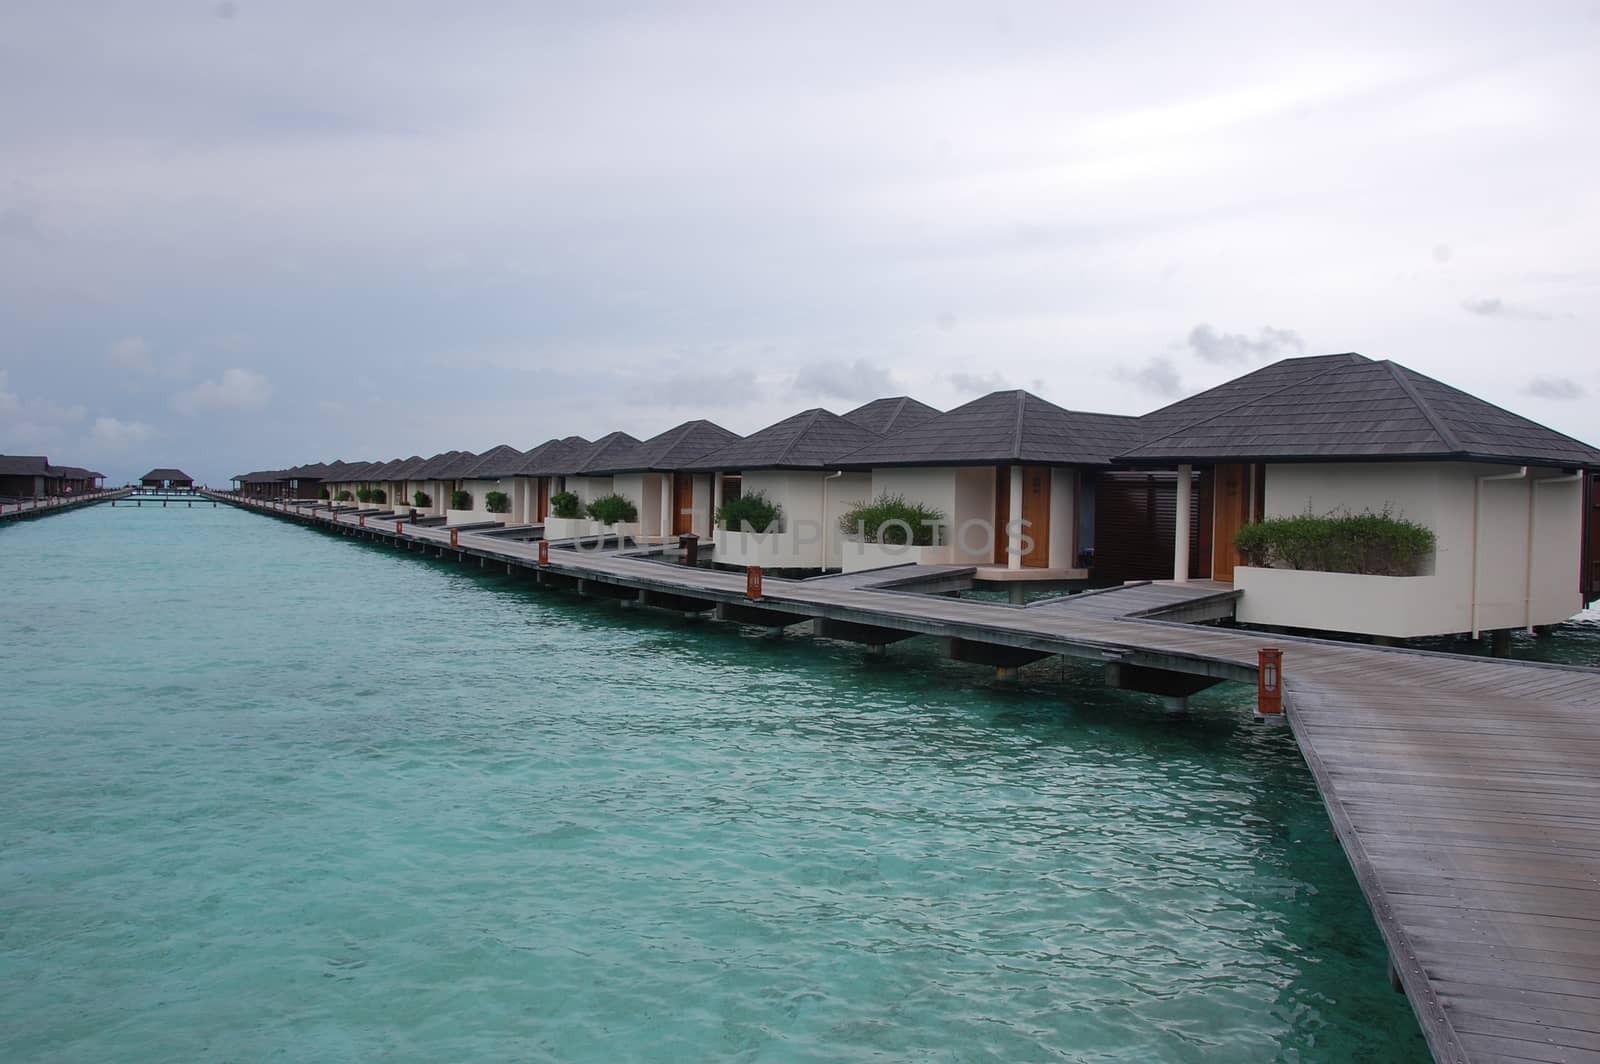 Timber pier with bungalow at island resort Maldives by danemo